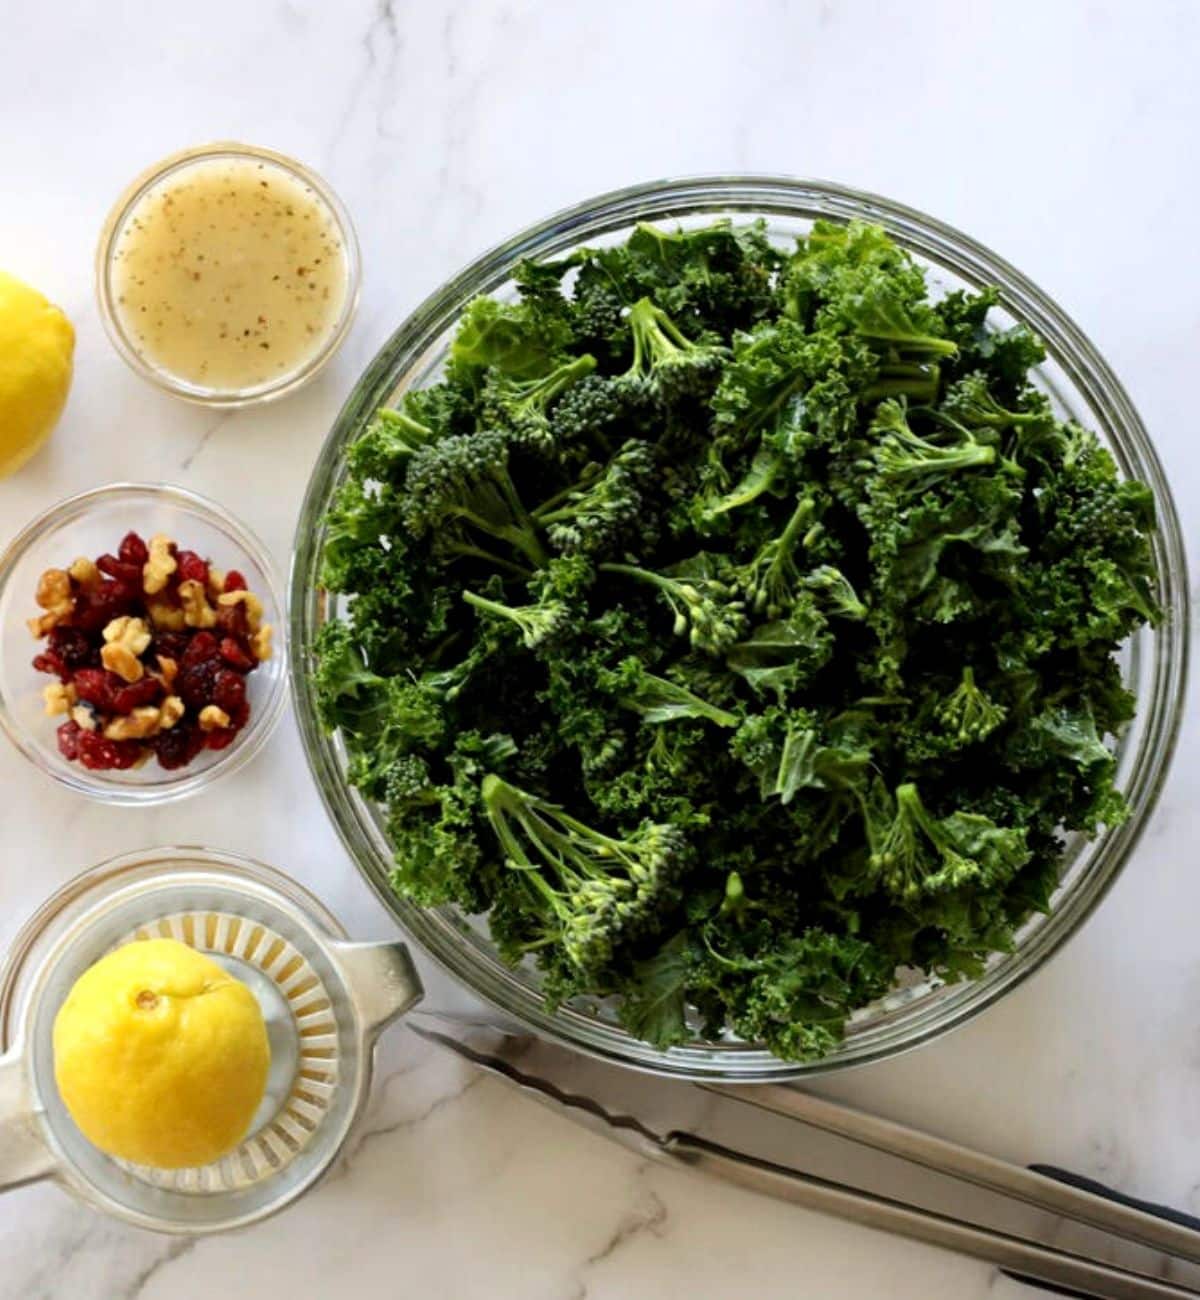 ingredients for kale salad with dressing